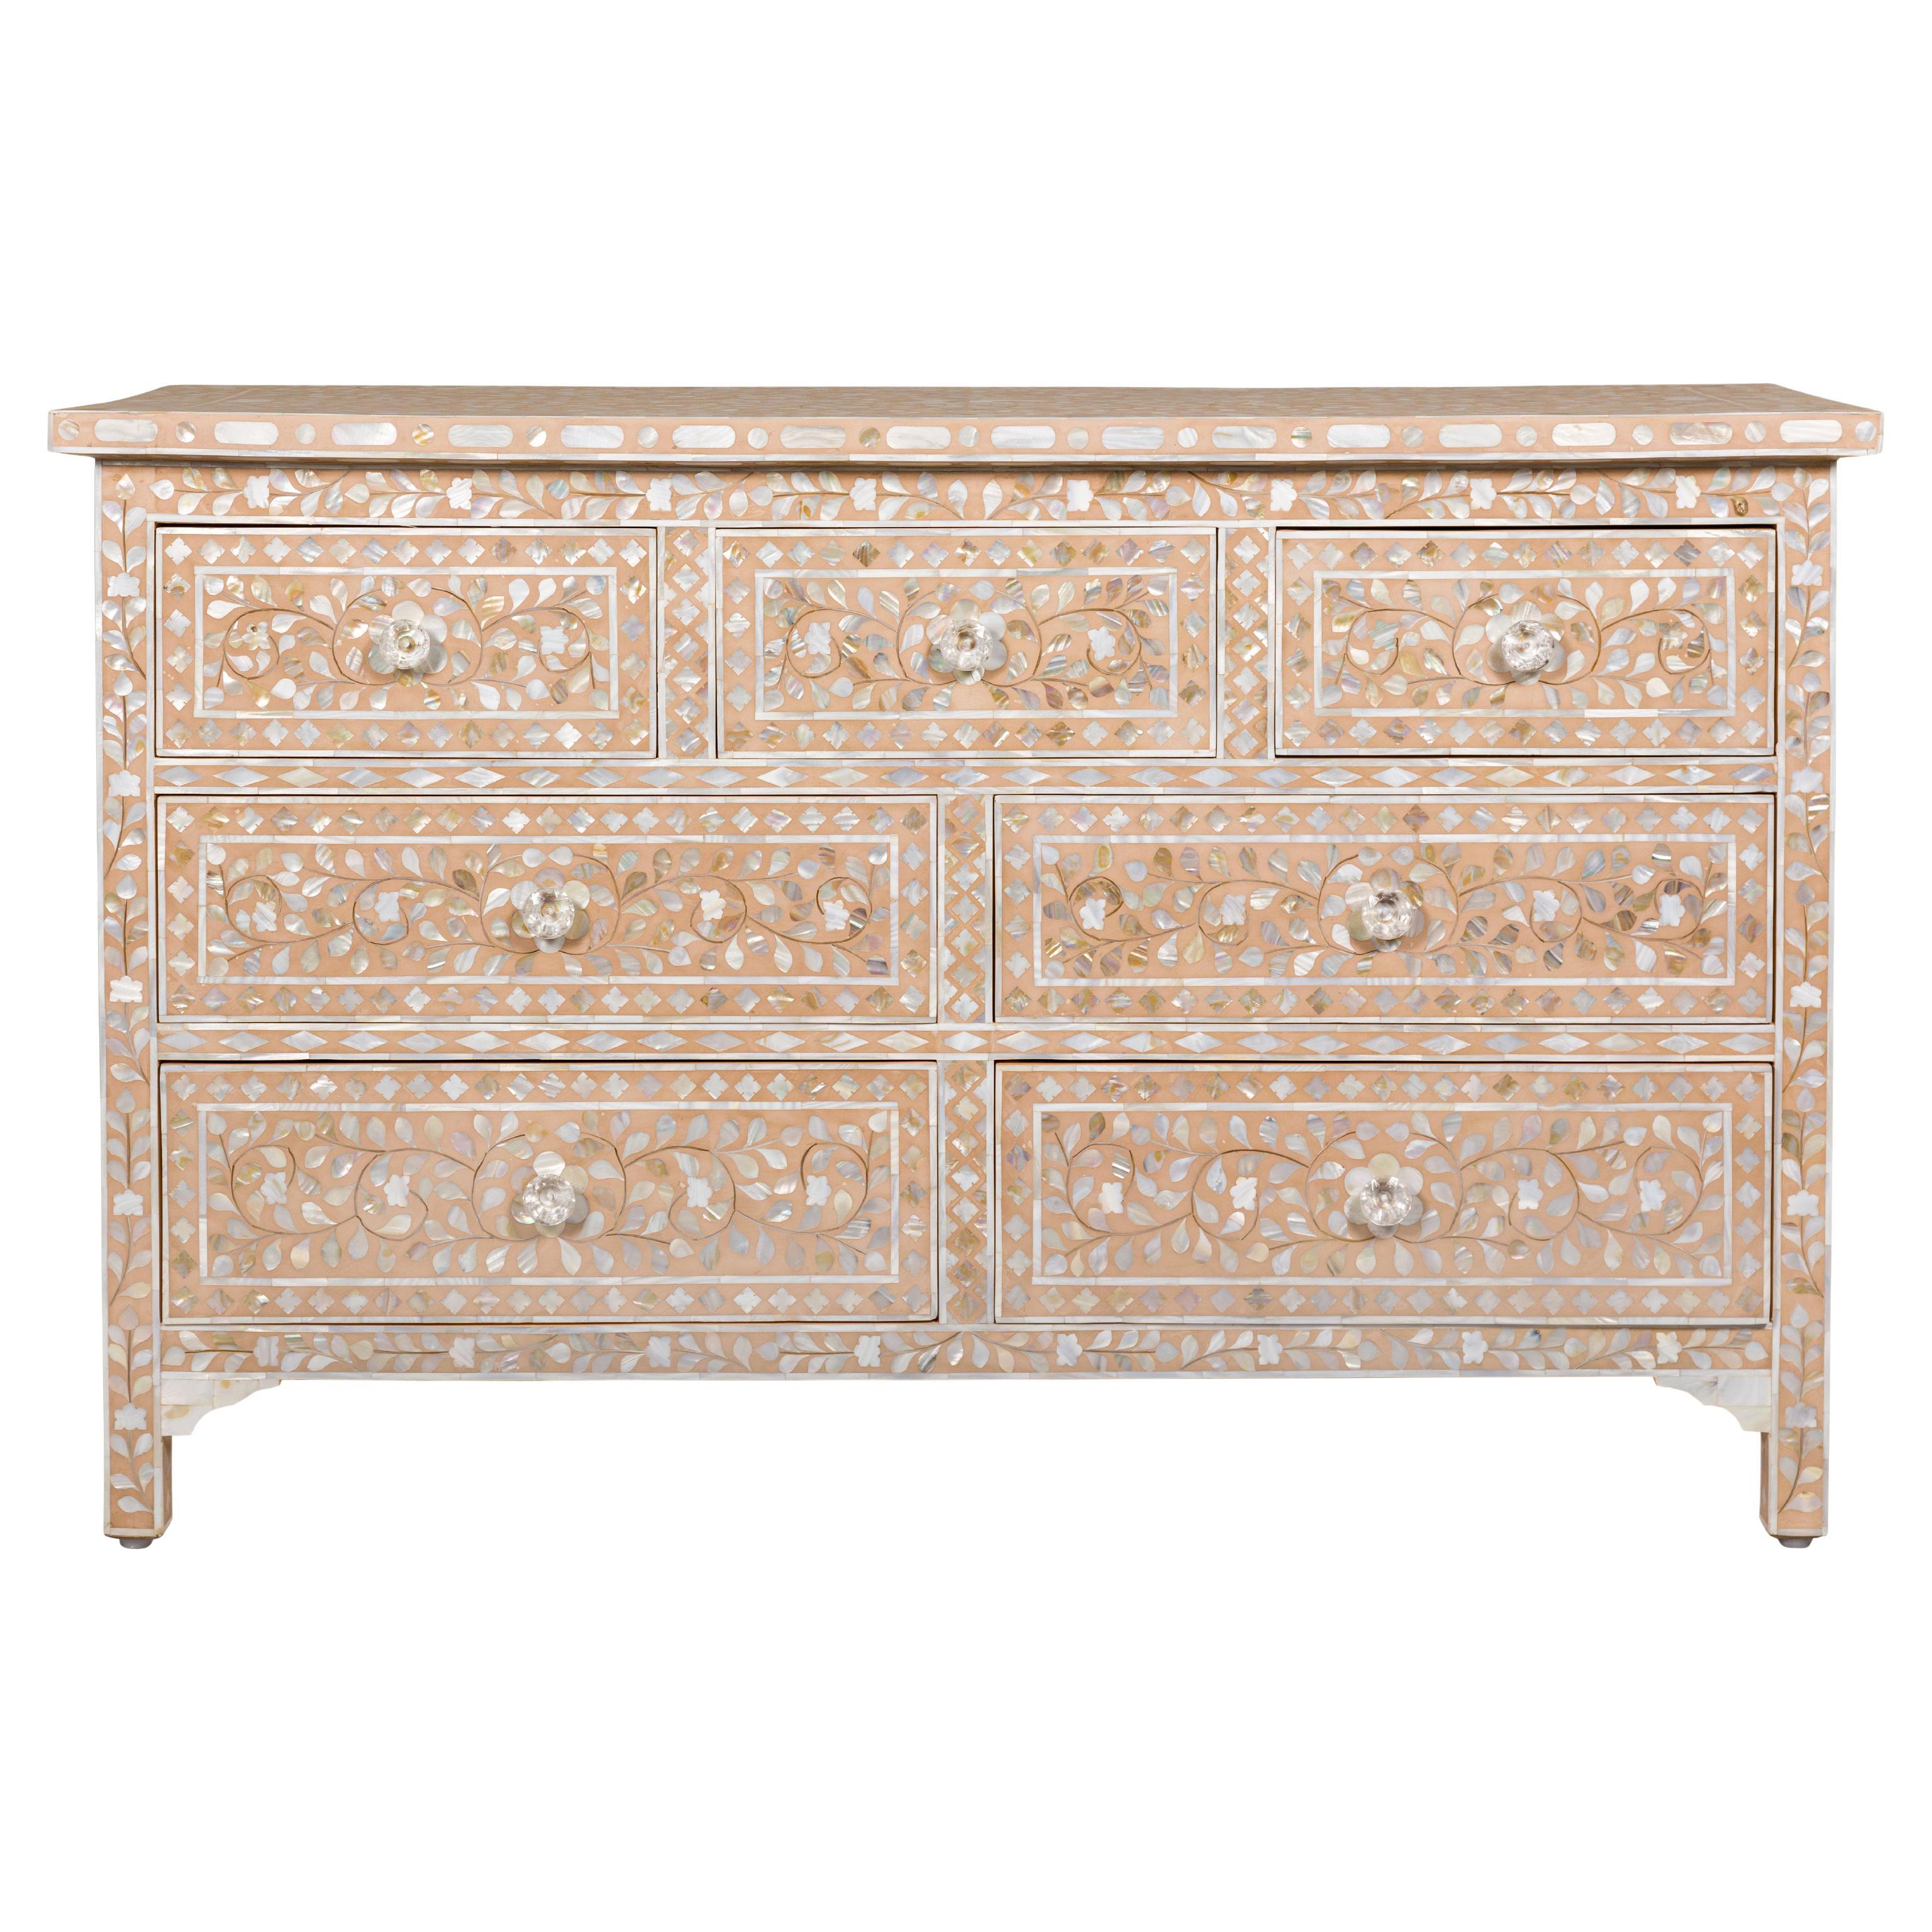 Anglo-Indian Style Soft Pink Dresser with Floral Themed Mother-of-Pearl Inlay For Sale